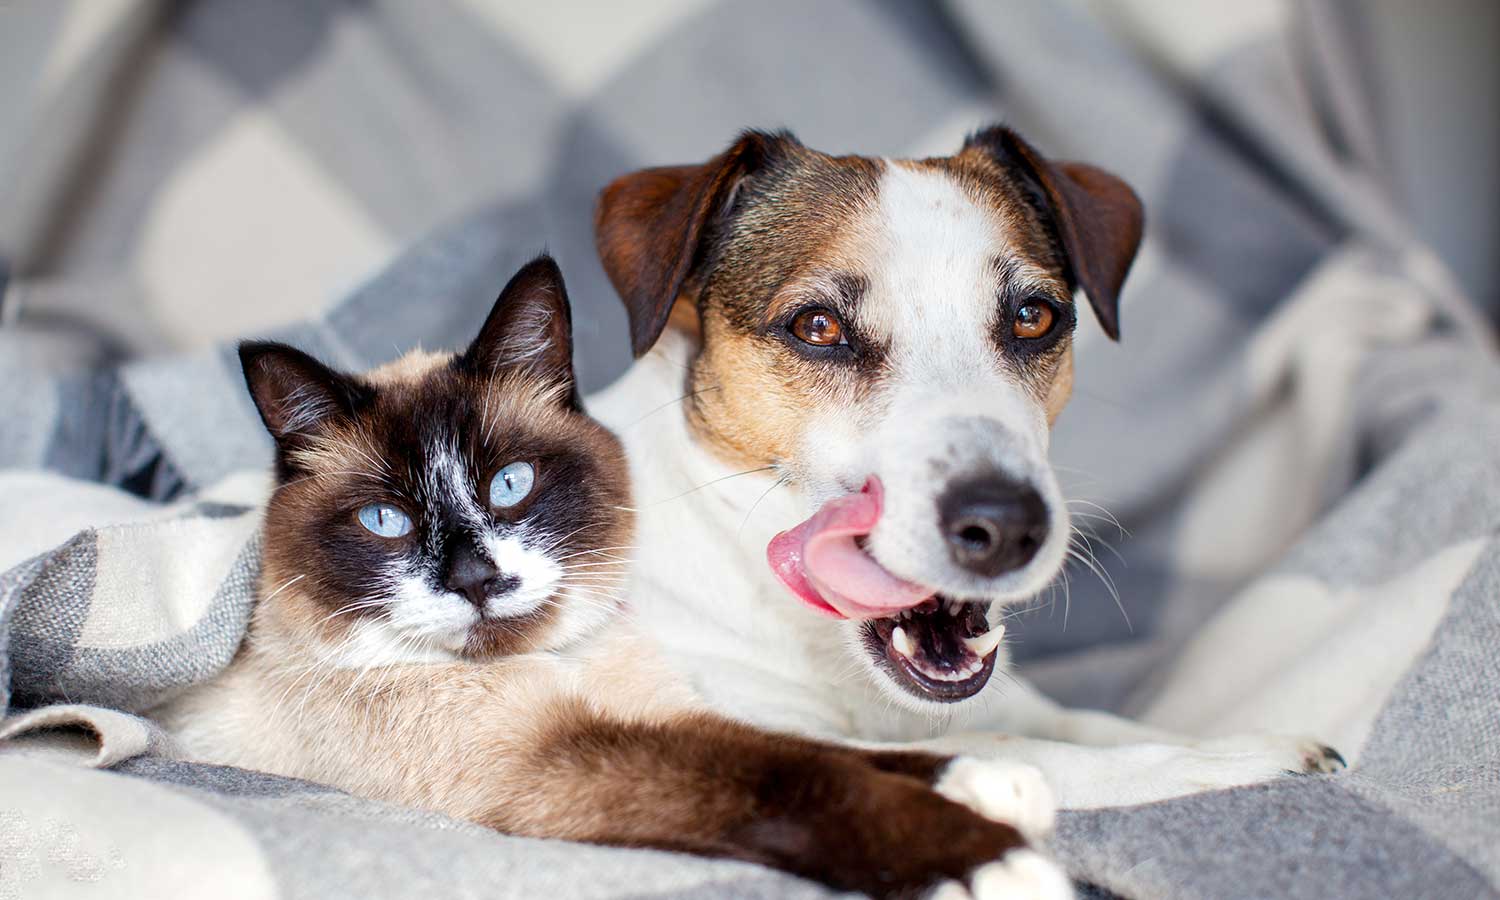 A cat and dog